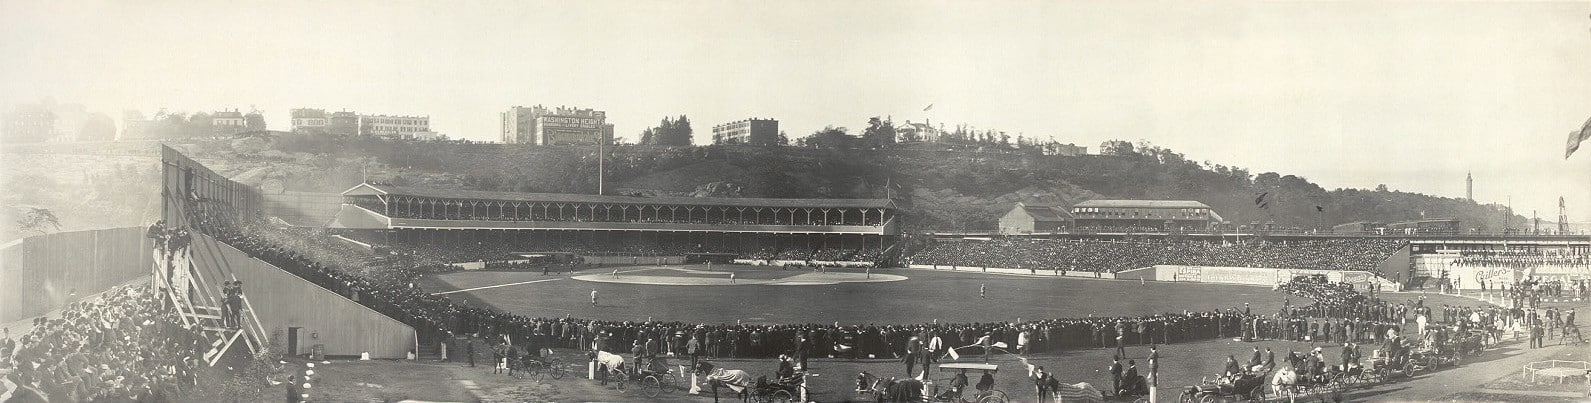 Polo Grounds during 1905 World Series